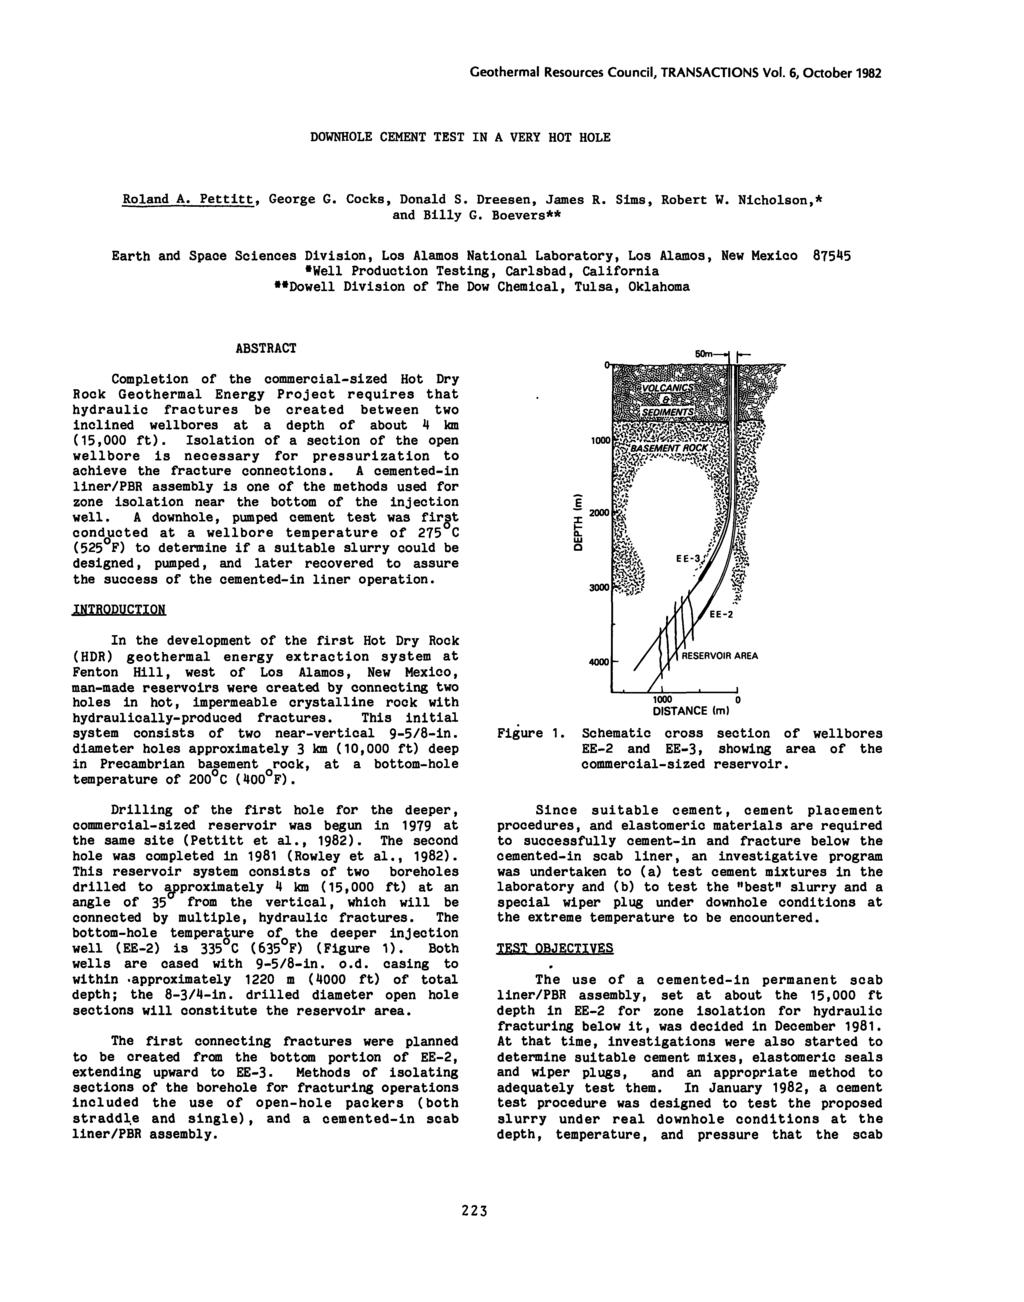 Geothermal Resources Council, TRANSACTIONS Vol. 6, October 1982 DOWNHOLE CEMENT TEST IN A VERY HOT HOLE Roland A. Pettitt, George G. Cocks, Donald S. Dreesen, James R. Sims, Robert W.